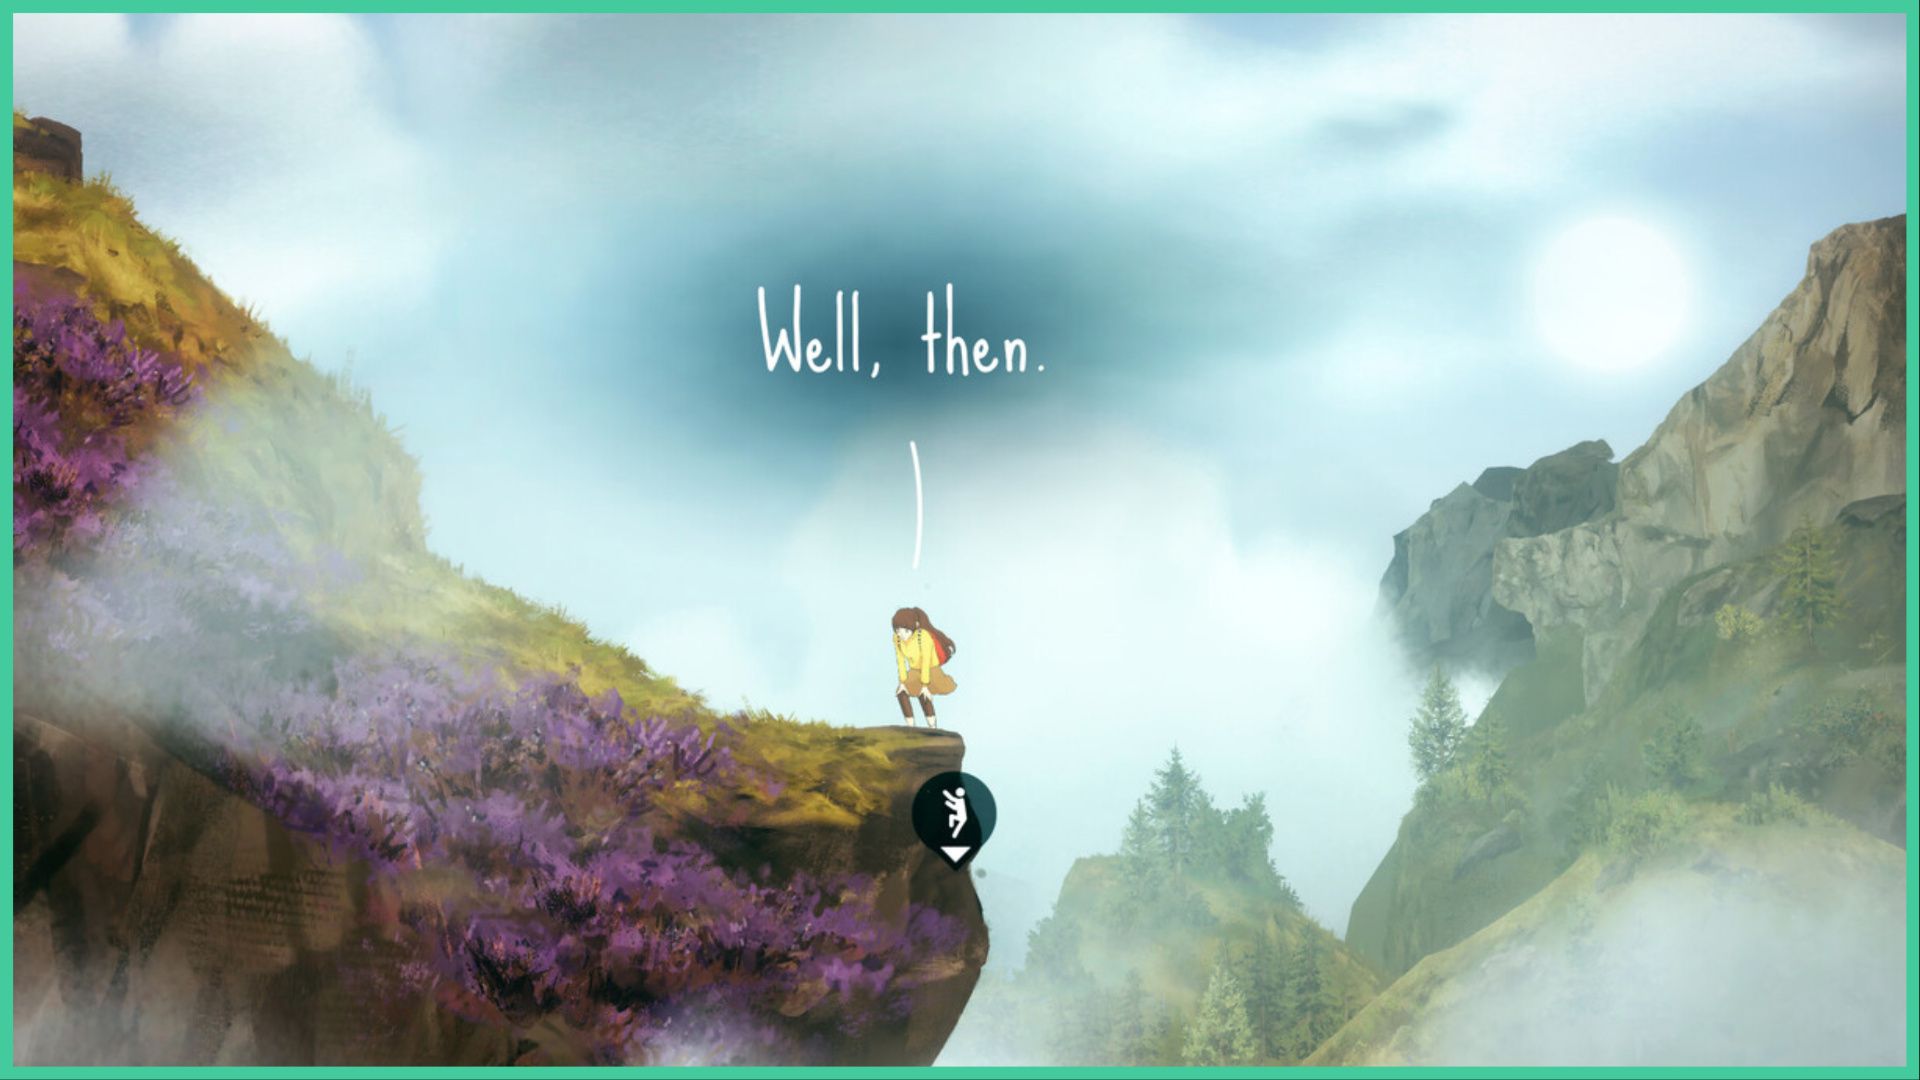 feature image for our a highland song news, the image features a screenshot from the game of moira catching her breath after climbing some rocks, there is dialogue above her head that says "well, then", she is standing on the edge of the cliff as she is surrounded by rocky mountains and mist, the hill she is on is covered in heather flowers